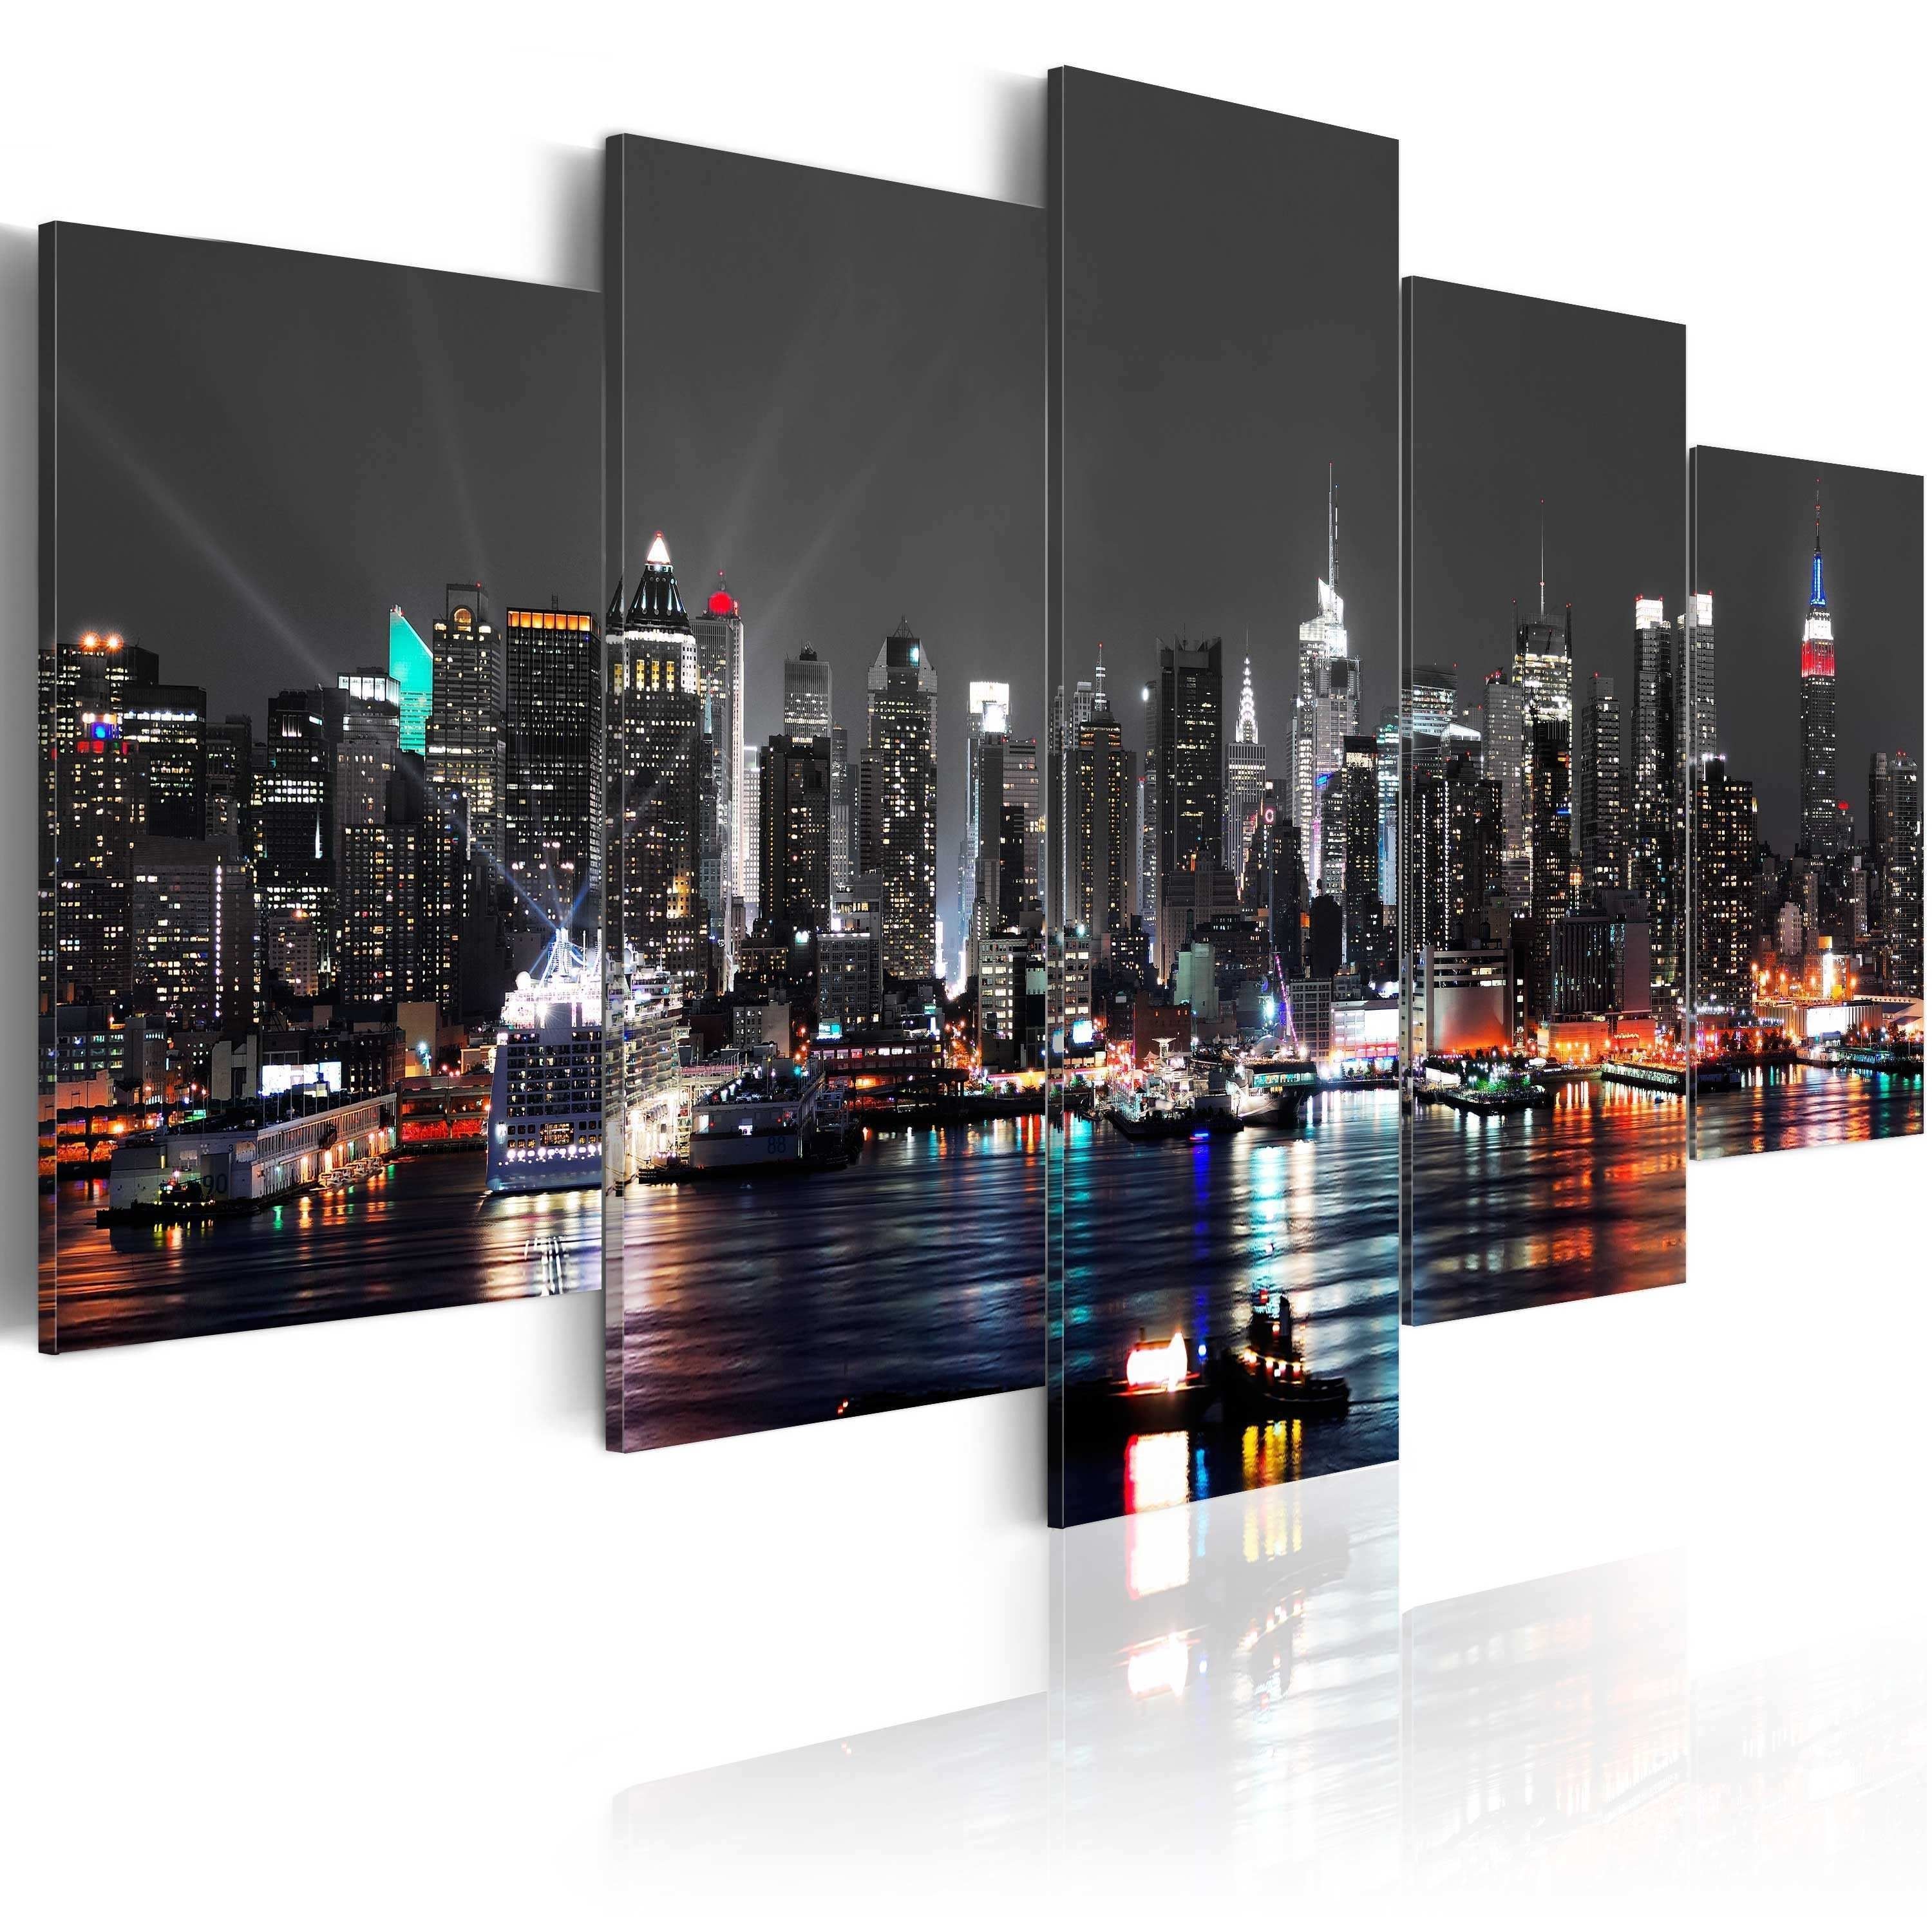 New York City Canvas Wall Art Best Of 46 Best Collection New York Inside New York Canvas Wall Art (View 6 of 20)